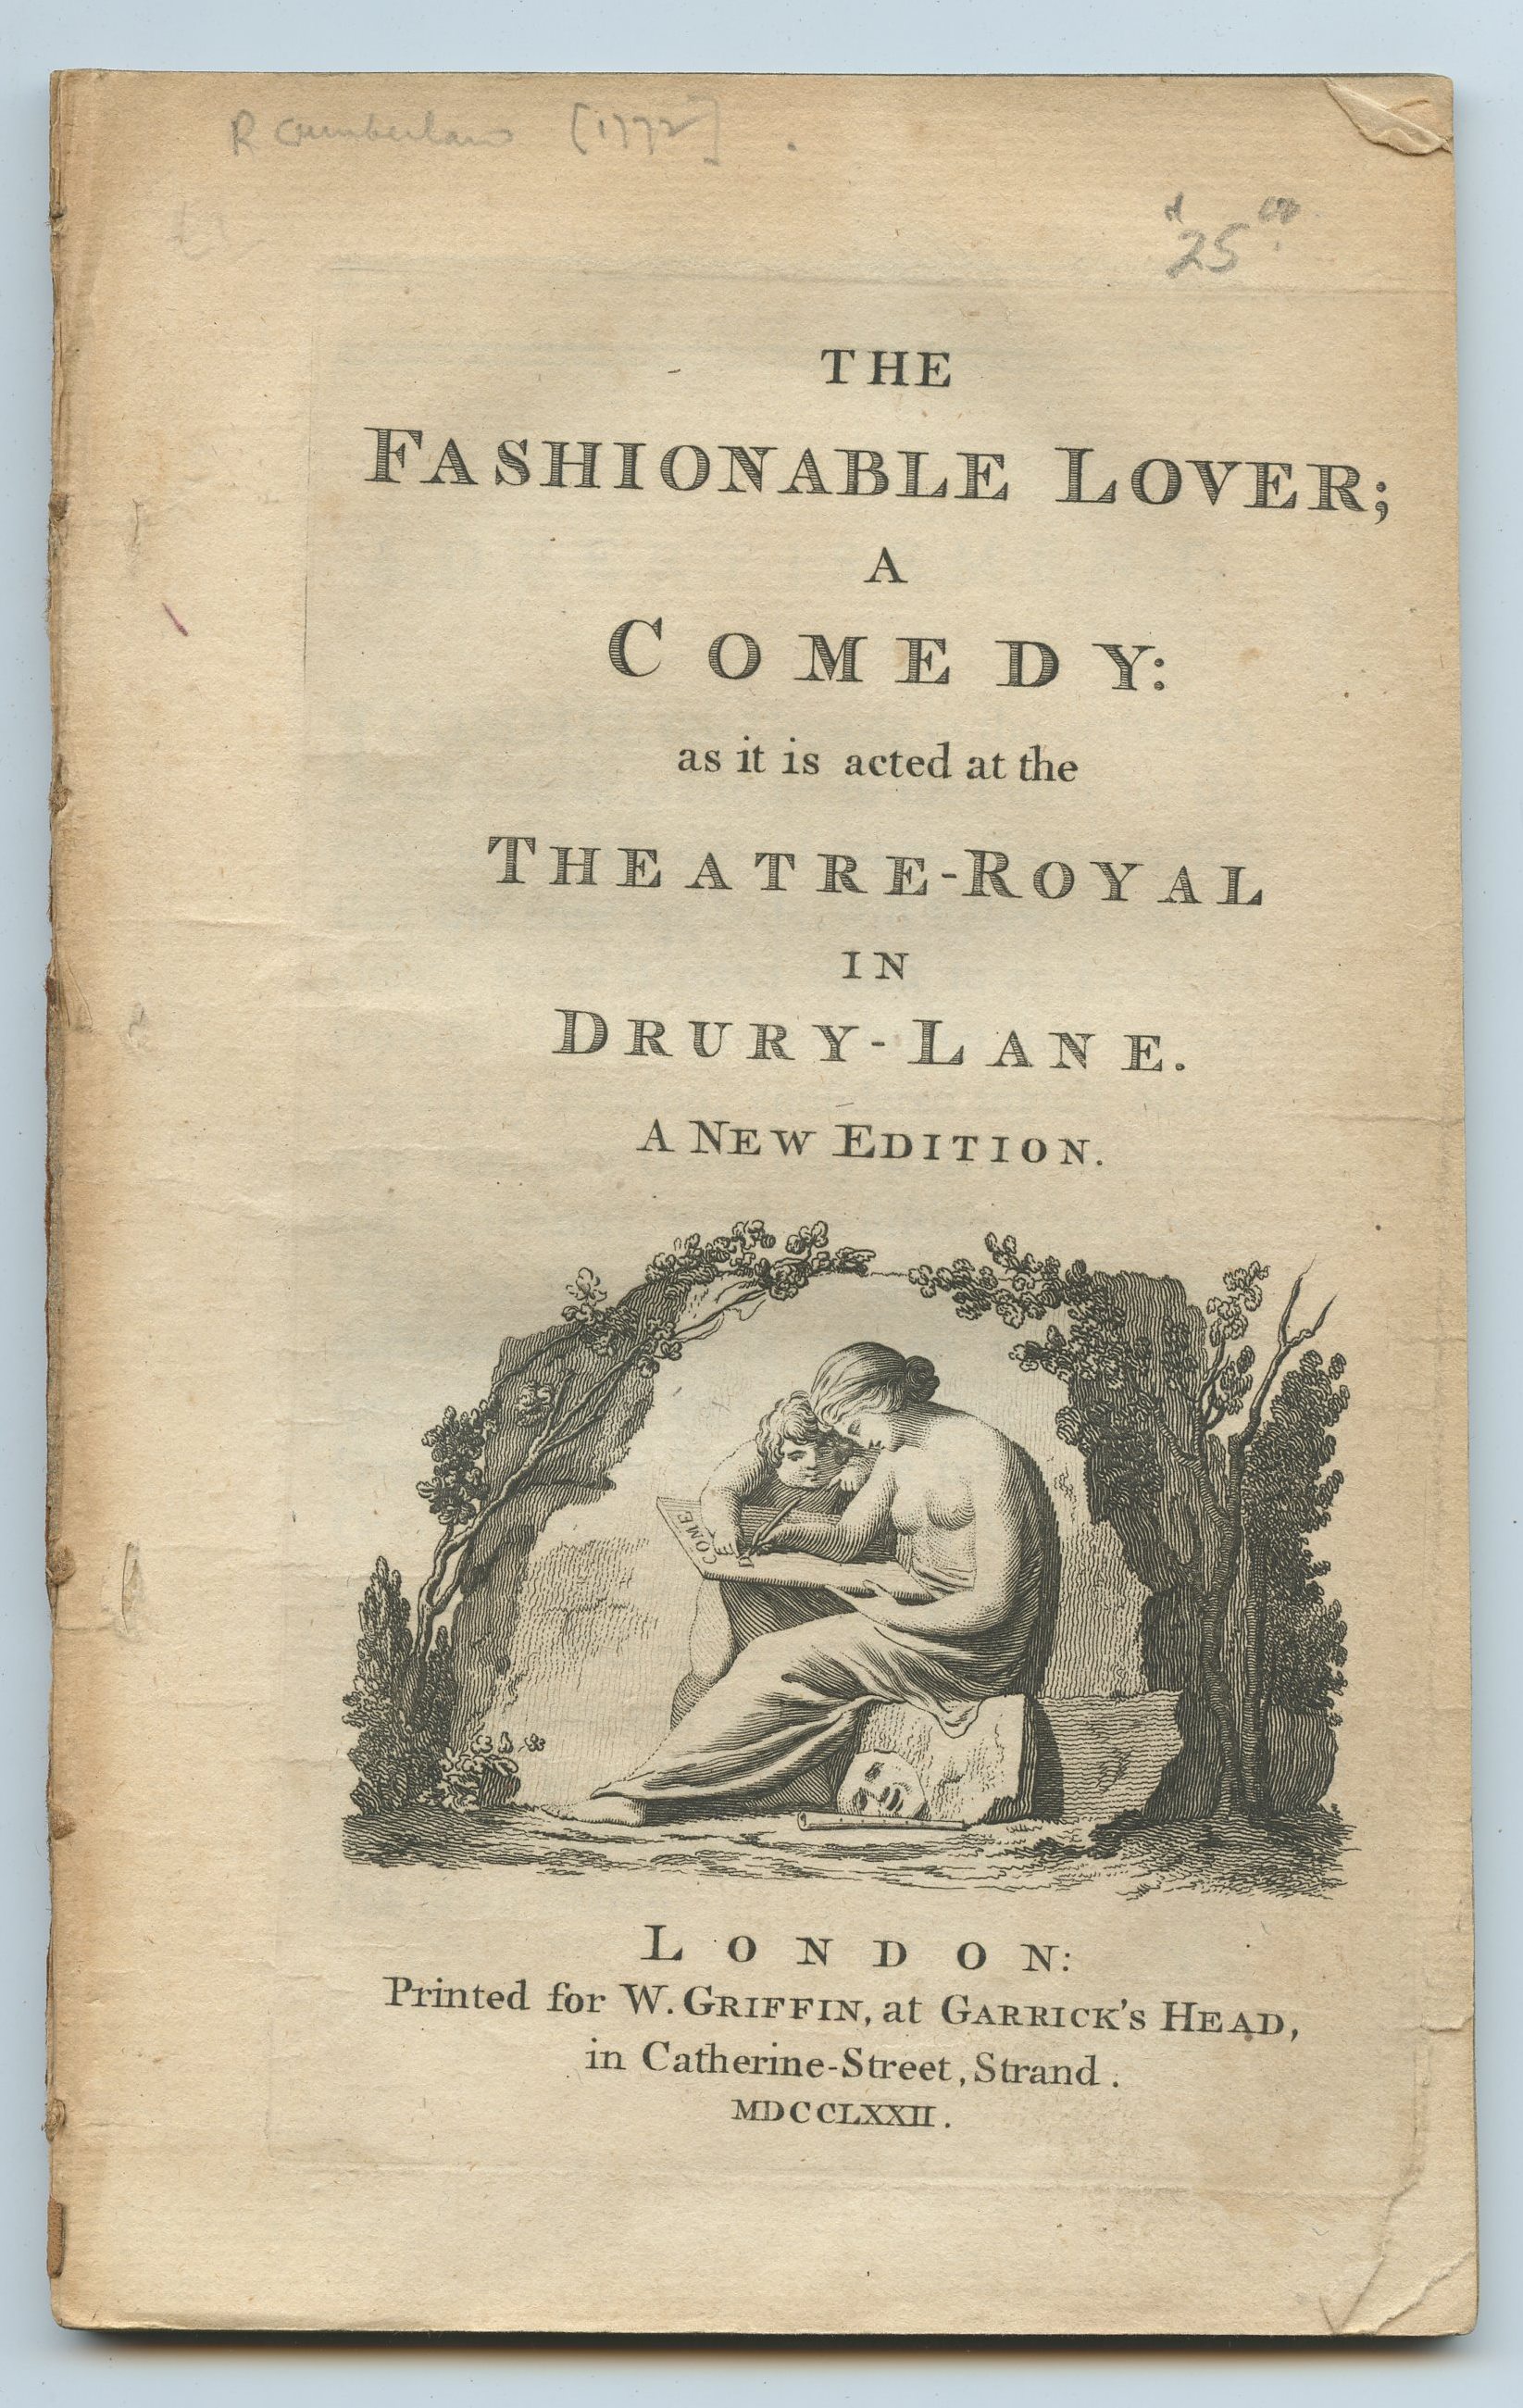 The Fashionable Lover; A Comedy: as it is acted at the Theatre-Royal in Drury-Lane - [CUMBERLAND, Richard]